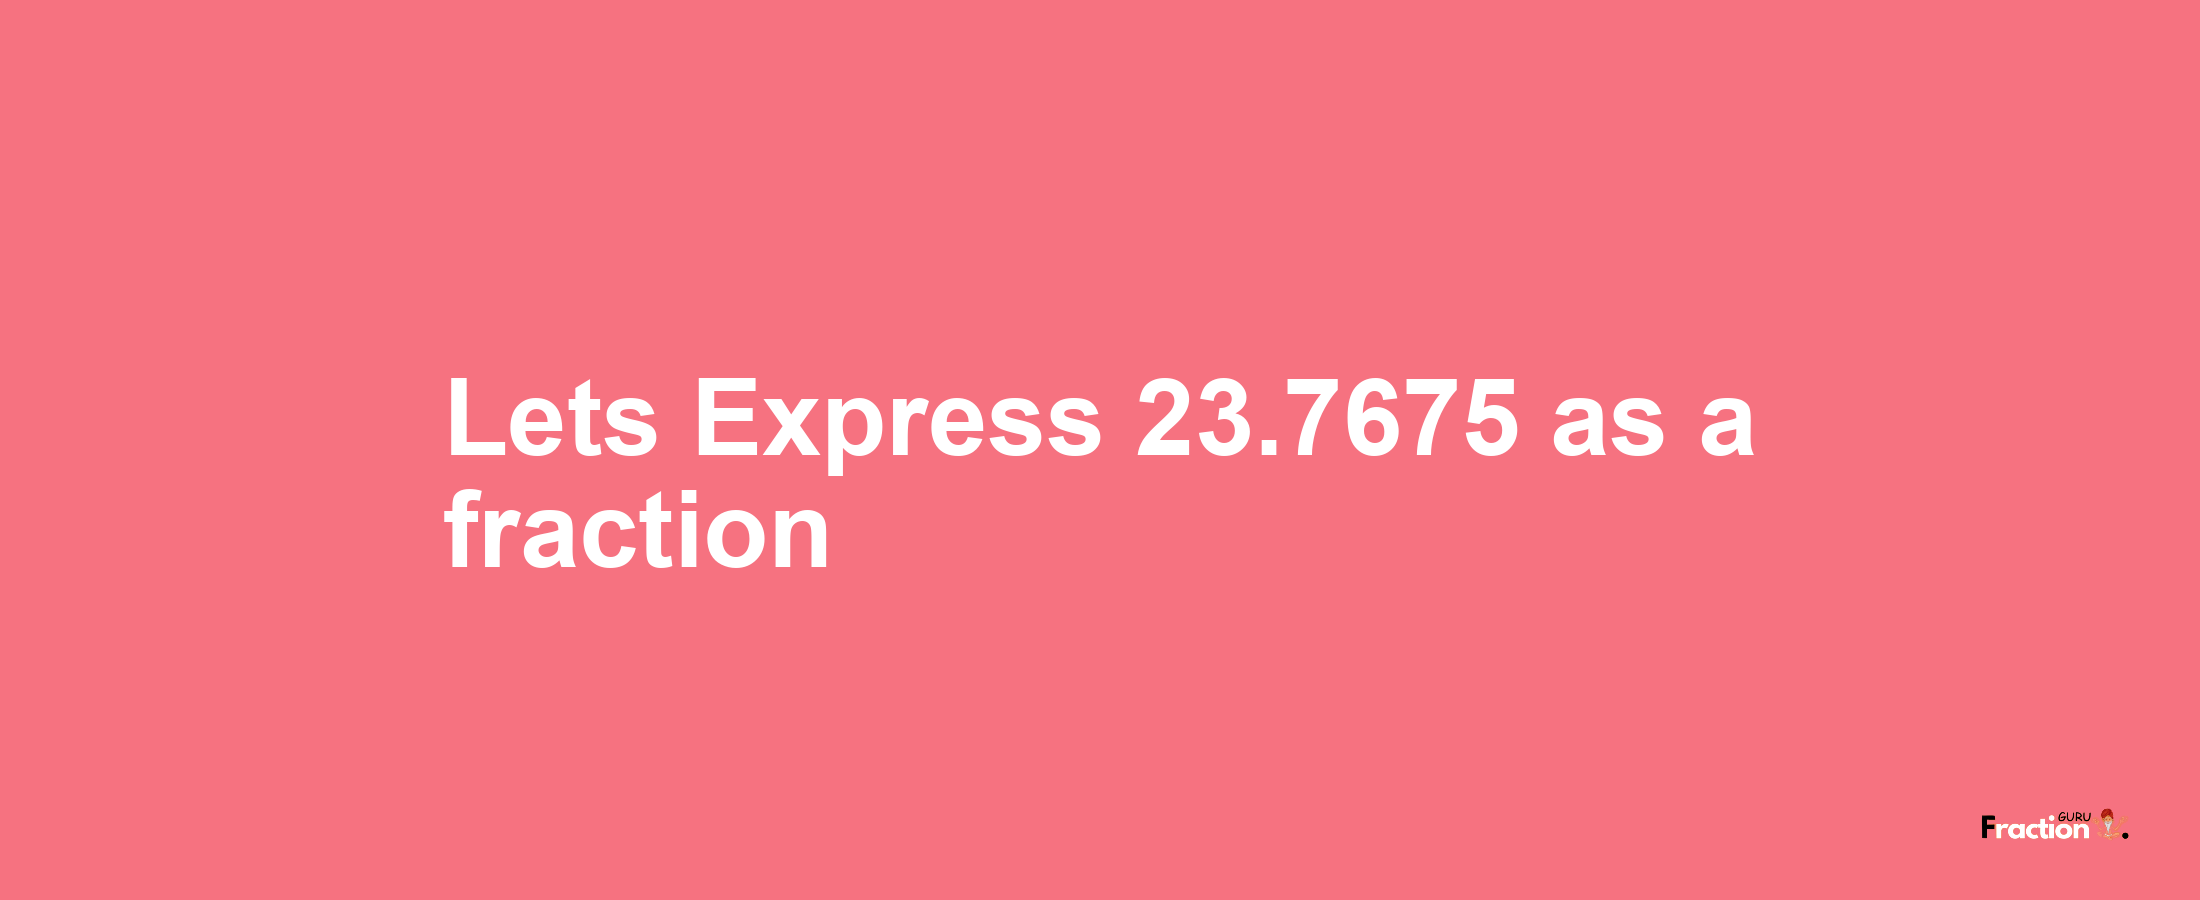 Lets Express 23.7675 as afraction